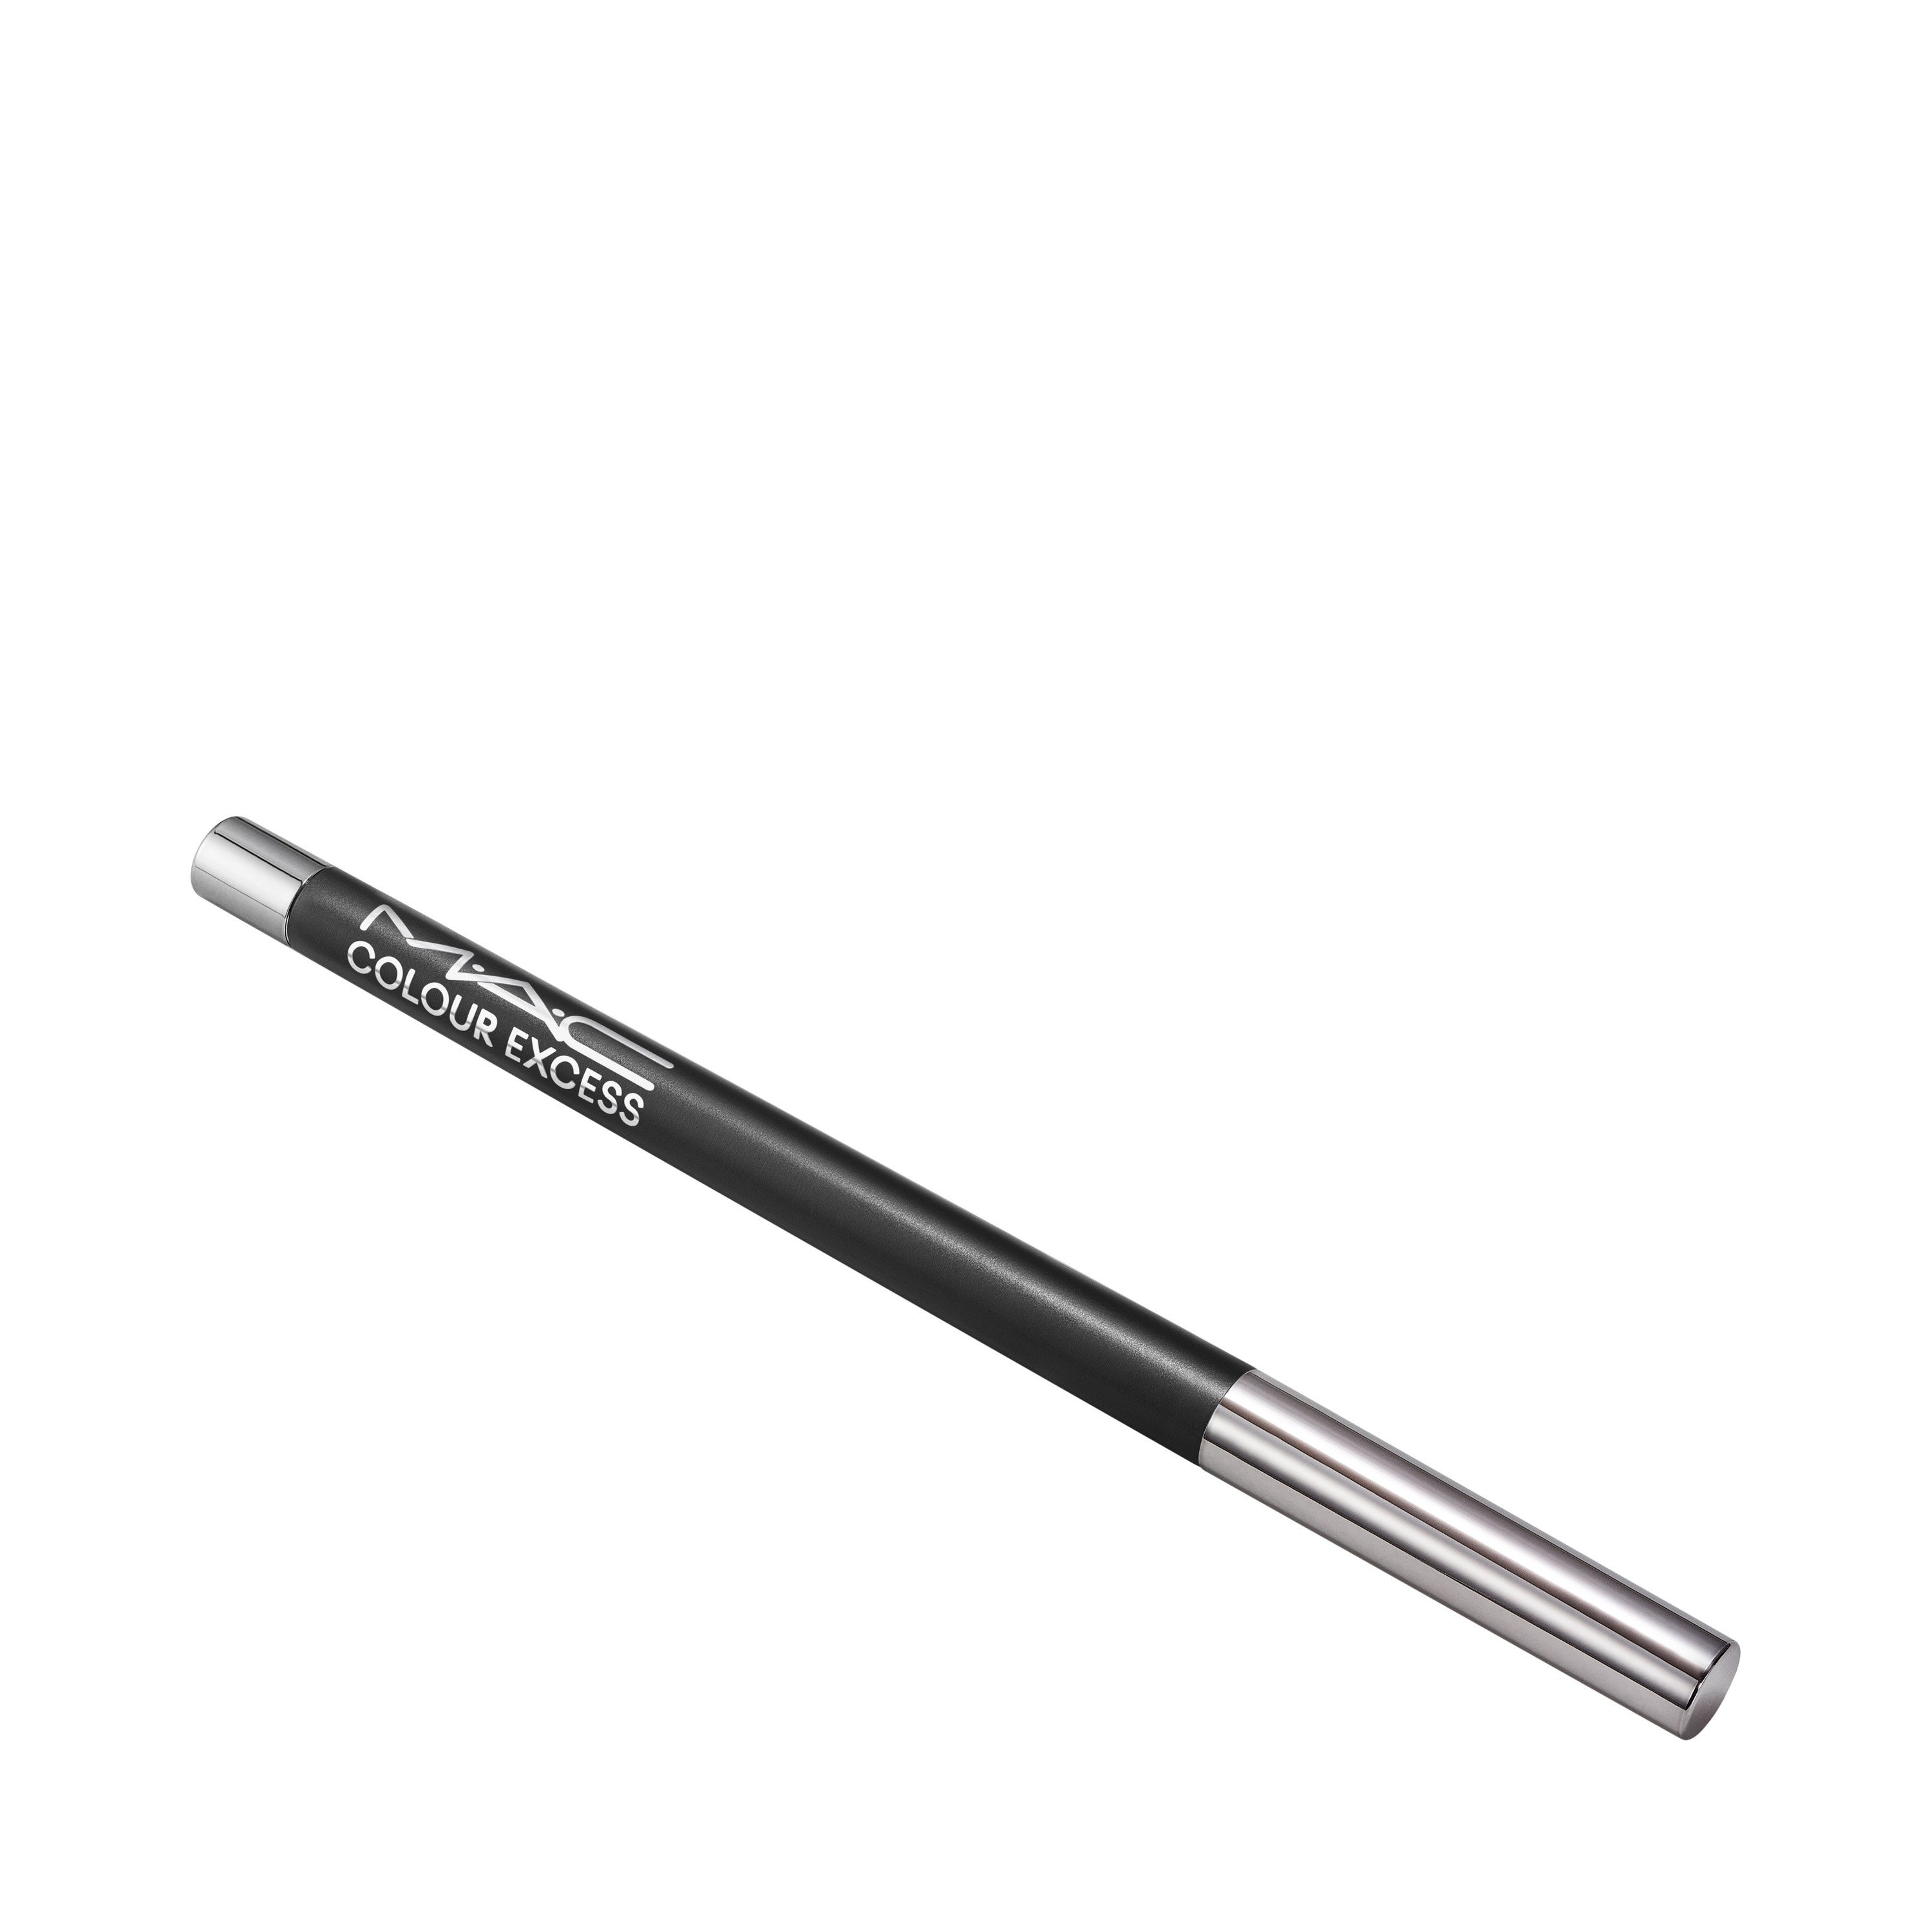 MICHELE MAGNANI SELECTION - Colour Excess Gel Liner-Glide Or Die, Nero, large image number 3